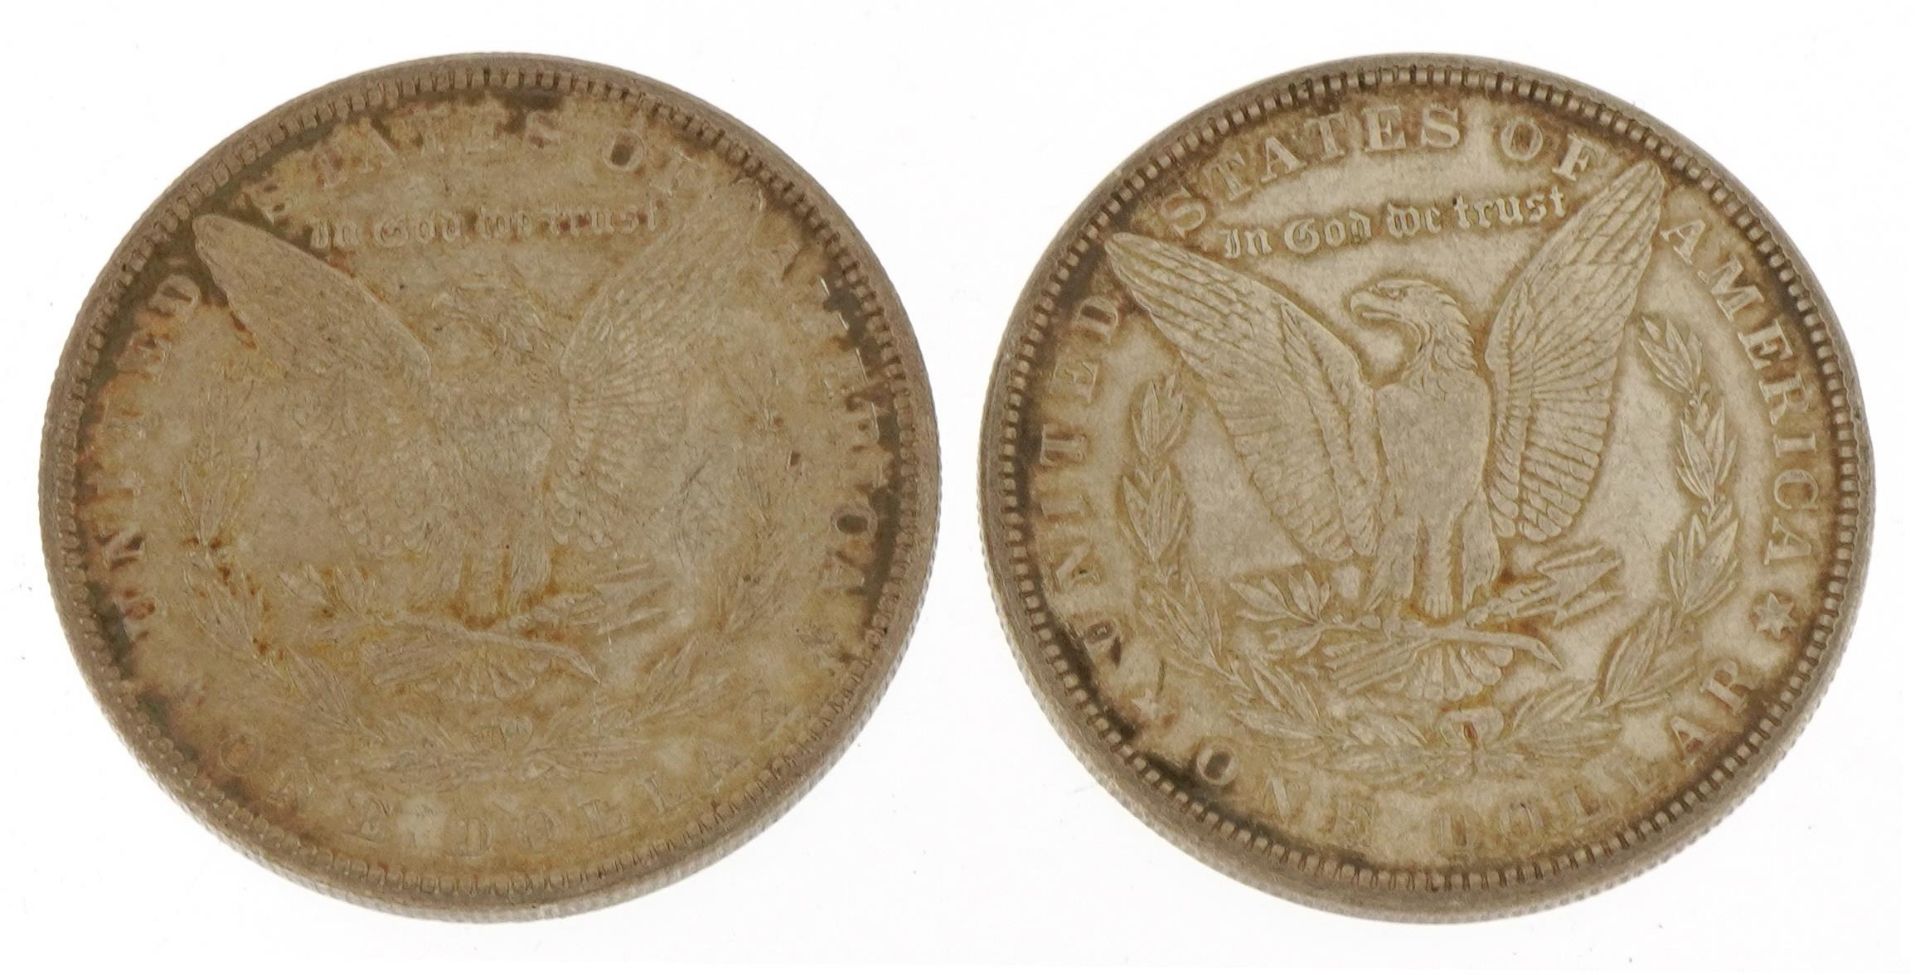 Two united states of America 1882 dollars - Image 2 of 2